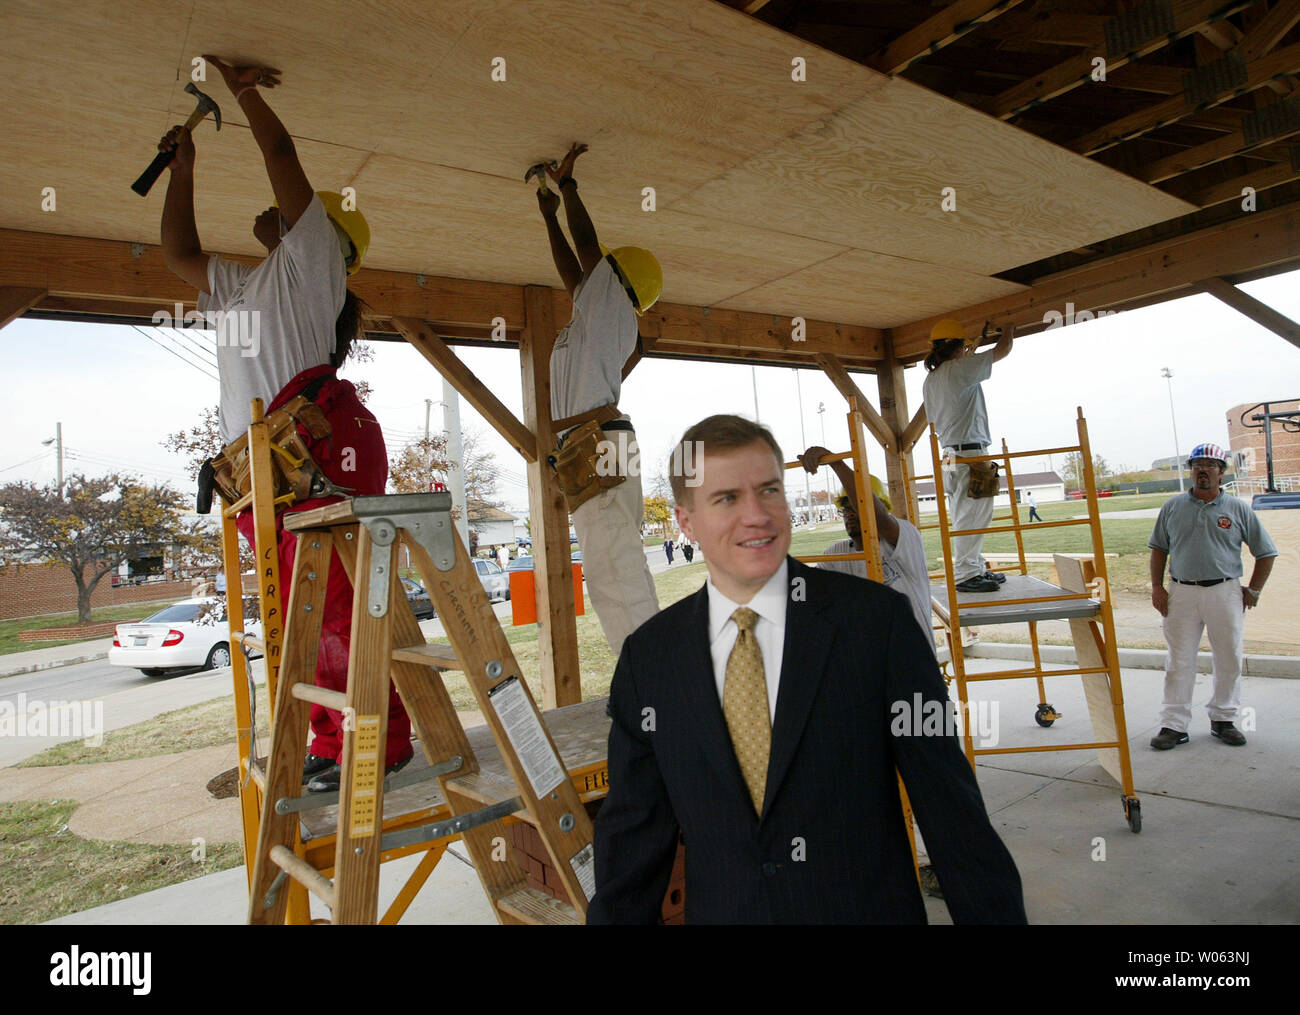 Missouri Gov. Matt Blunt tours the St. Louis Jobs Corps as students install a ceiling on a gazebo in St. Louis on November 8, 2005. Blunt was on hand for a panel discussion among represenatives of Missouri's employers, trade associations and community colleges. The panel is emphasizing the importance of job training that reflects Missouri's changing workforce needs and the roles of employers, educators and Job Corps centers. (UPI Photo/Bill Greenblatt) Stock Photo